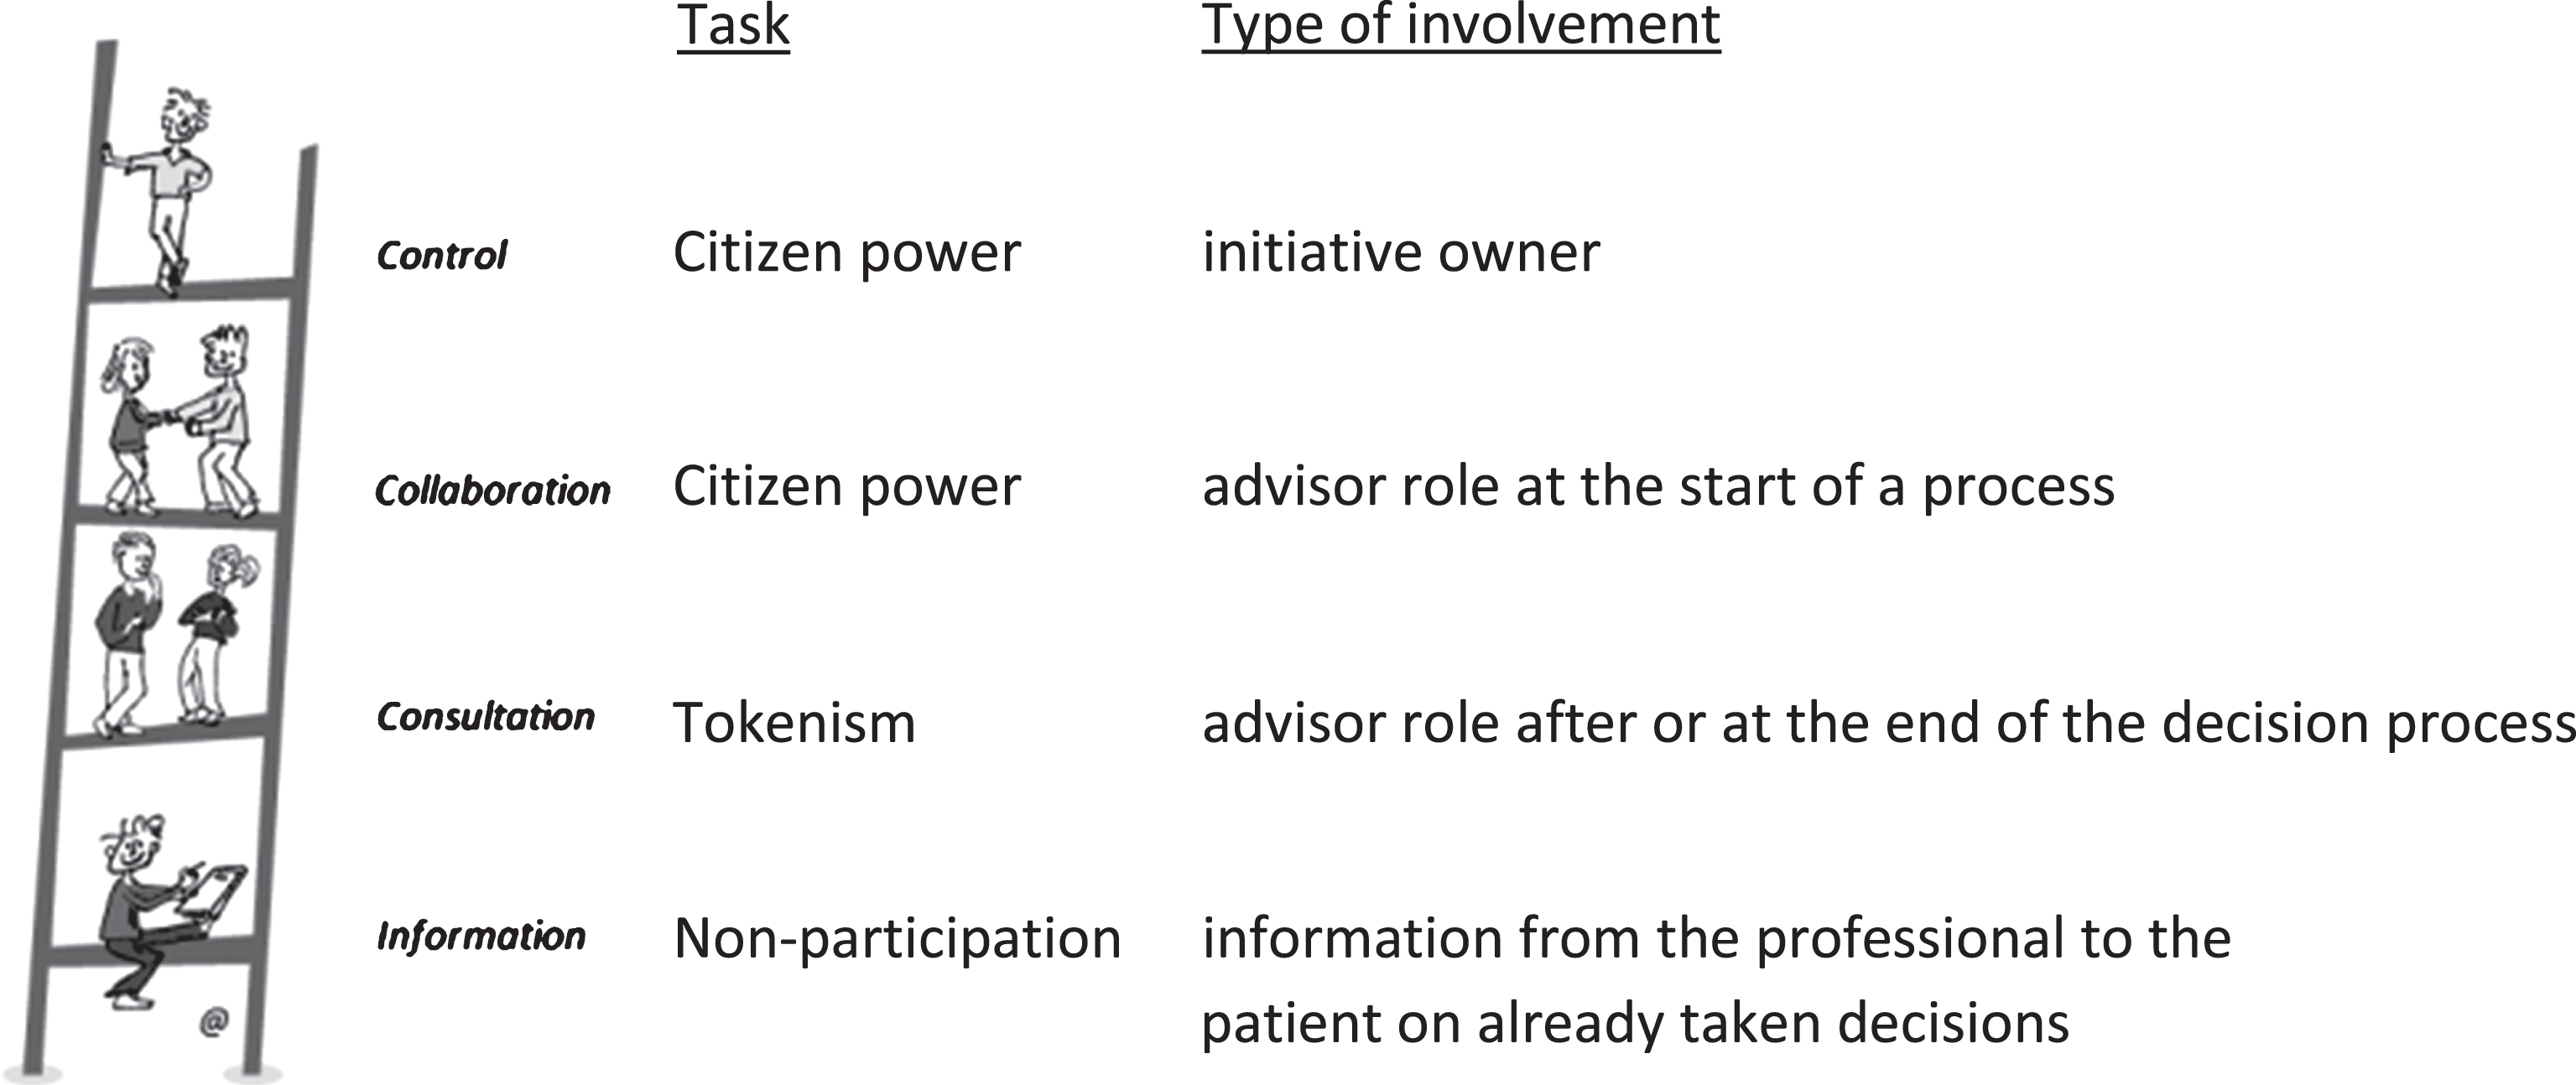 Levels of proactive patient involvement along the participation ladder (A. Ambrosini; modified from [17]).